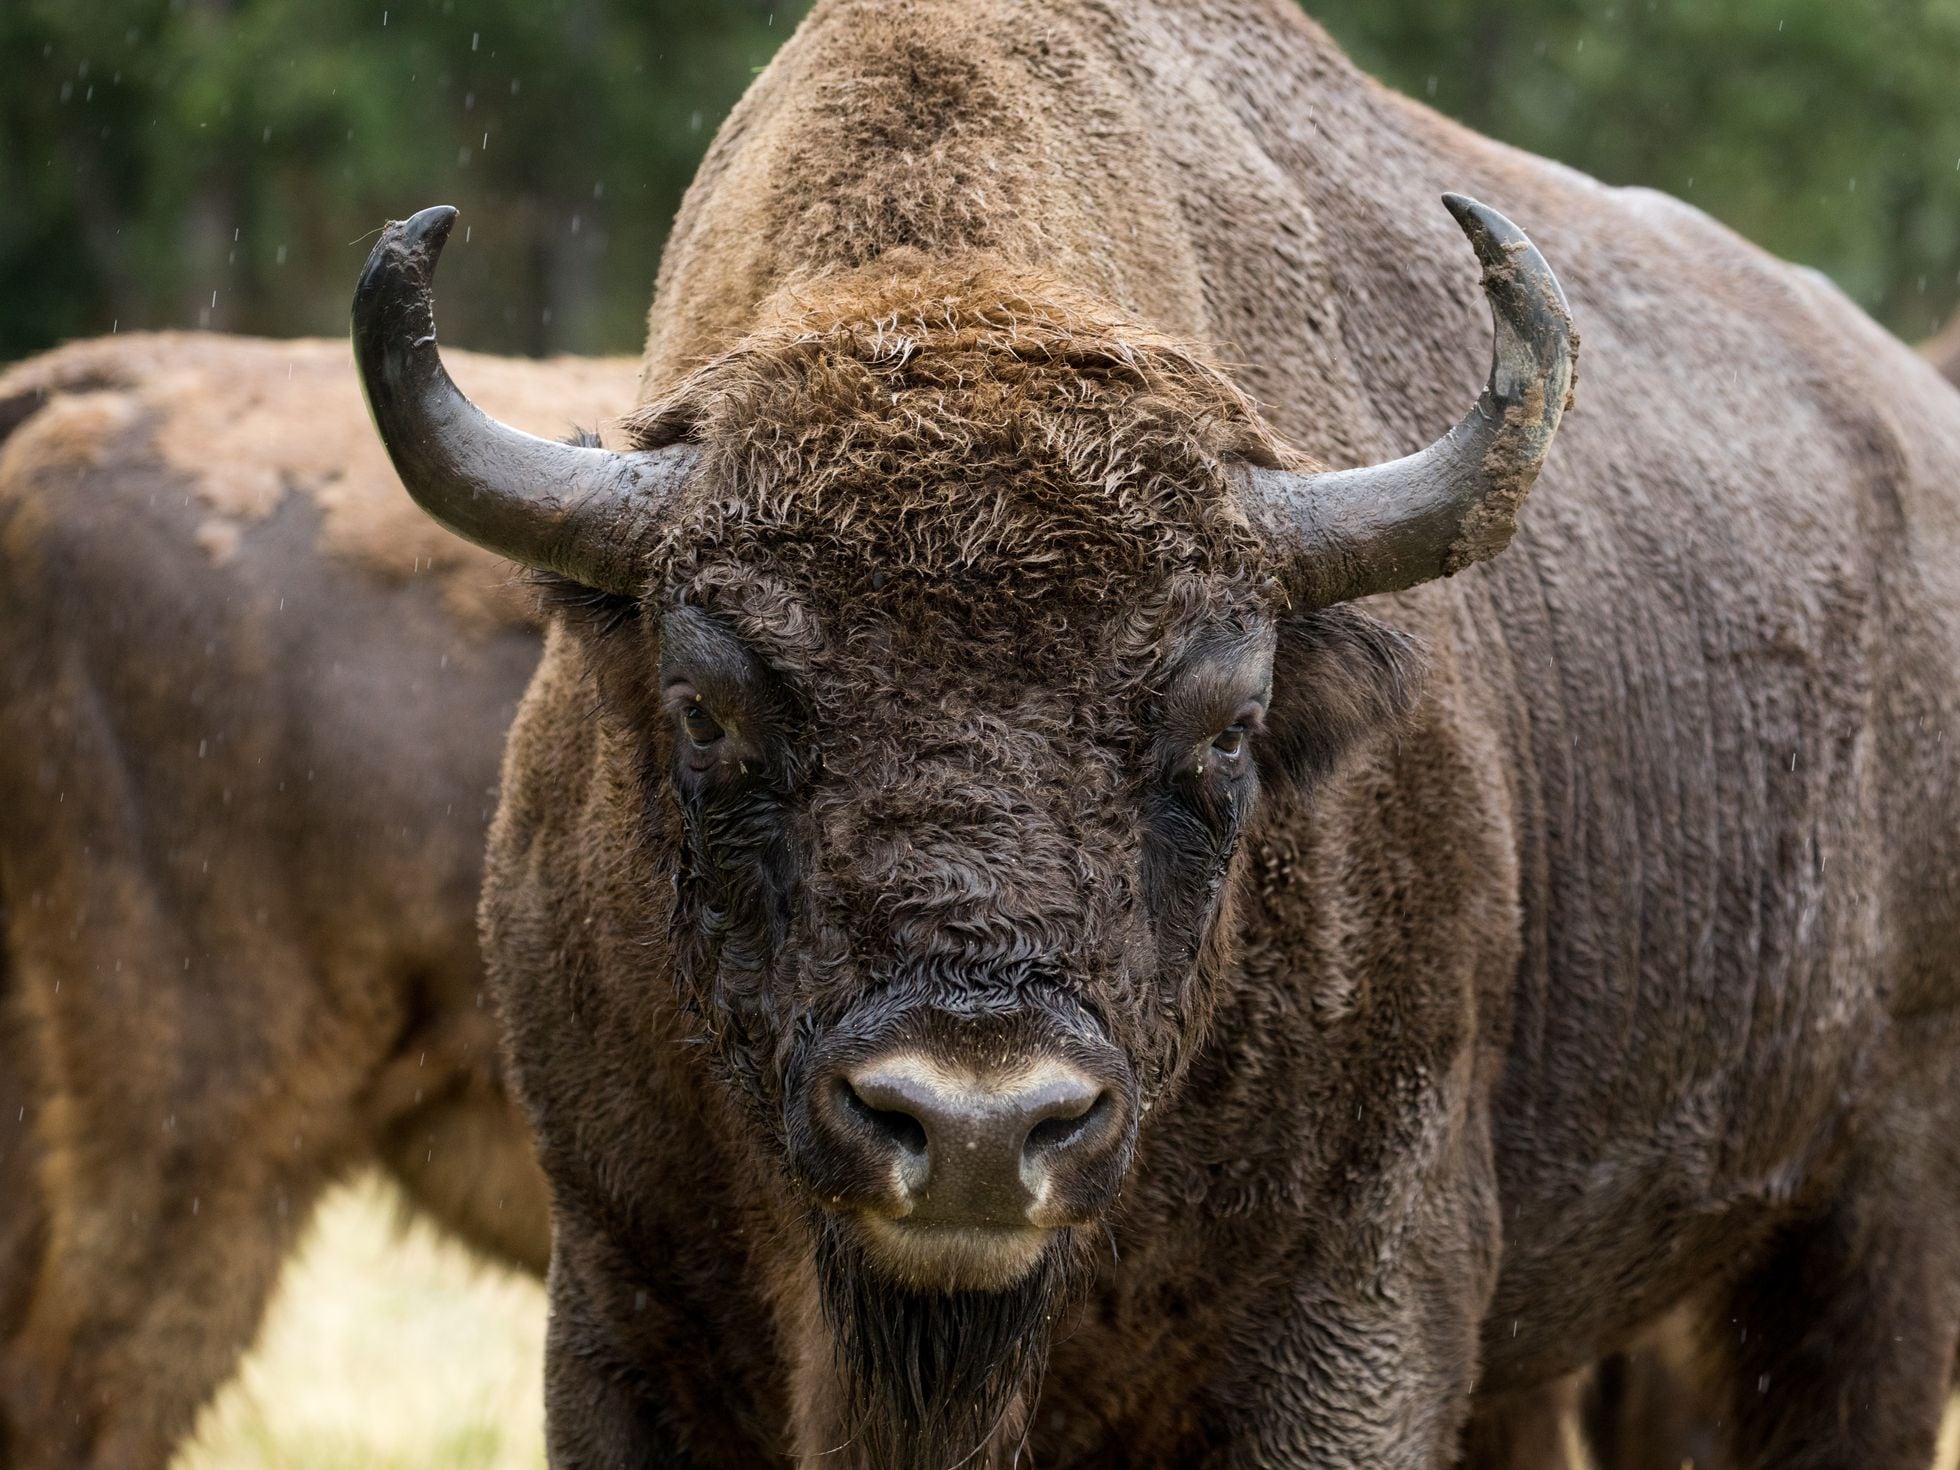 Bison in Spain: the risks of introducing an 'exotic' species | Science &  Tech | EL PAÍS English Edition